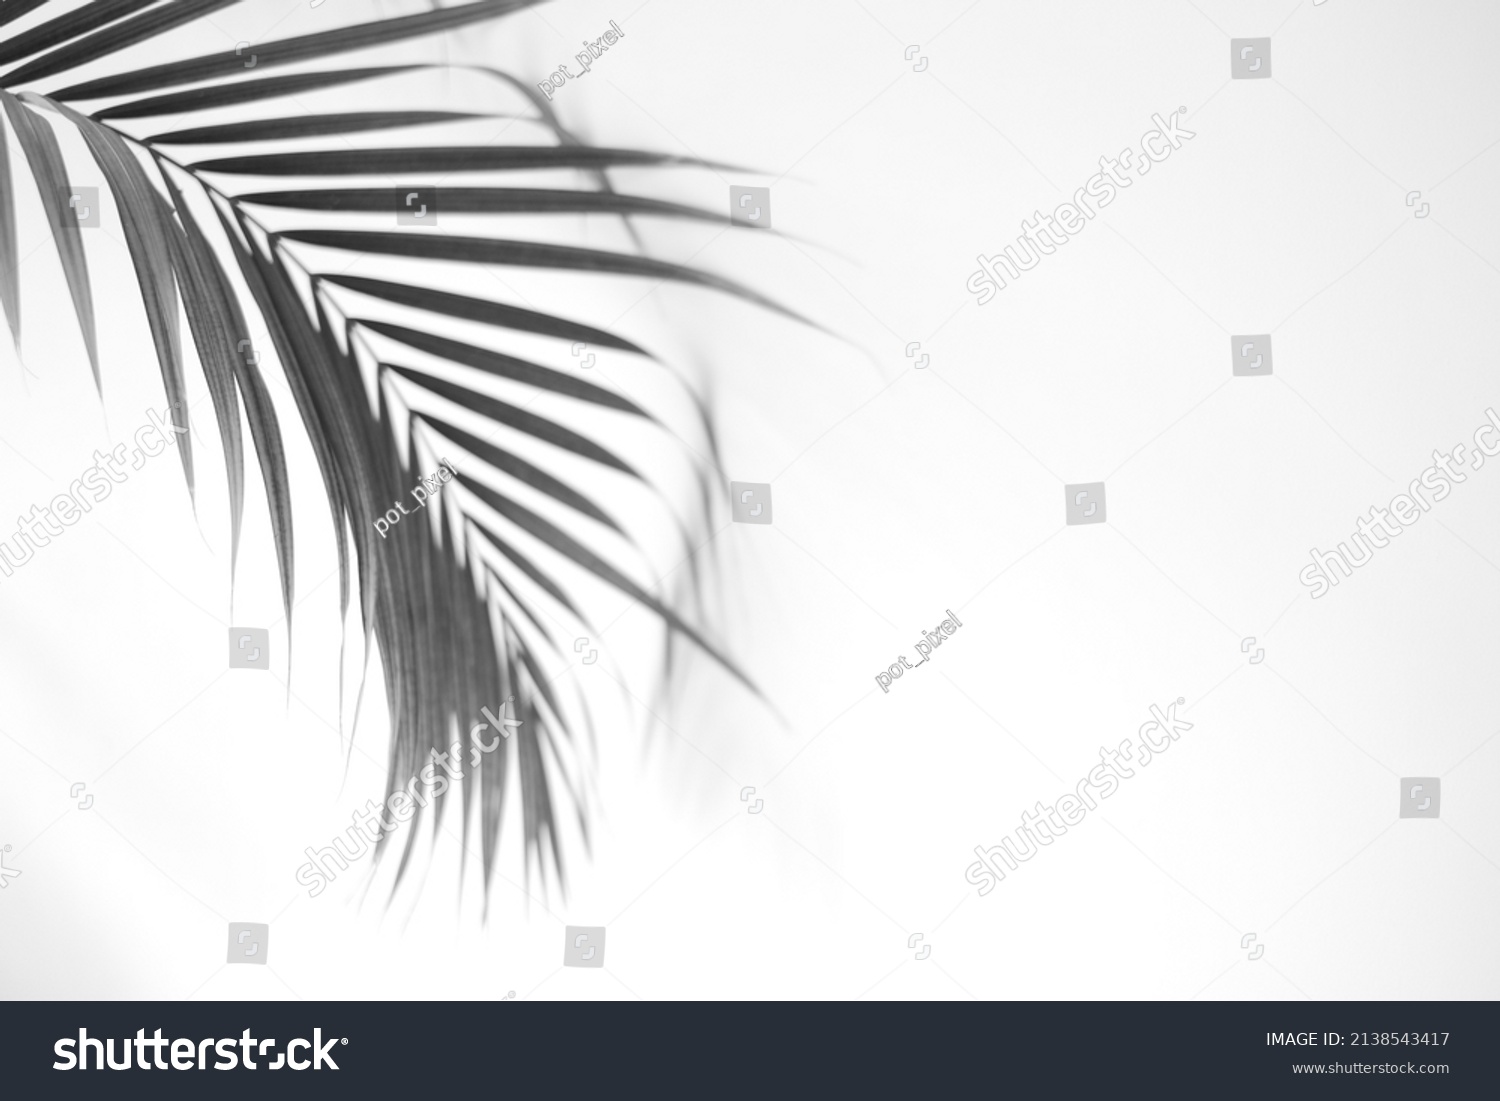 Coconut Leaf Shadow On White Background Stock Photo 2138543417 ...